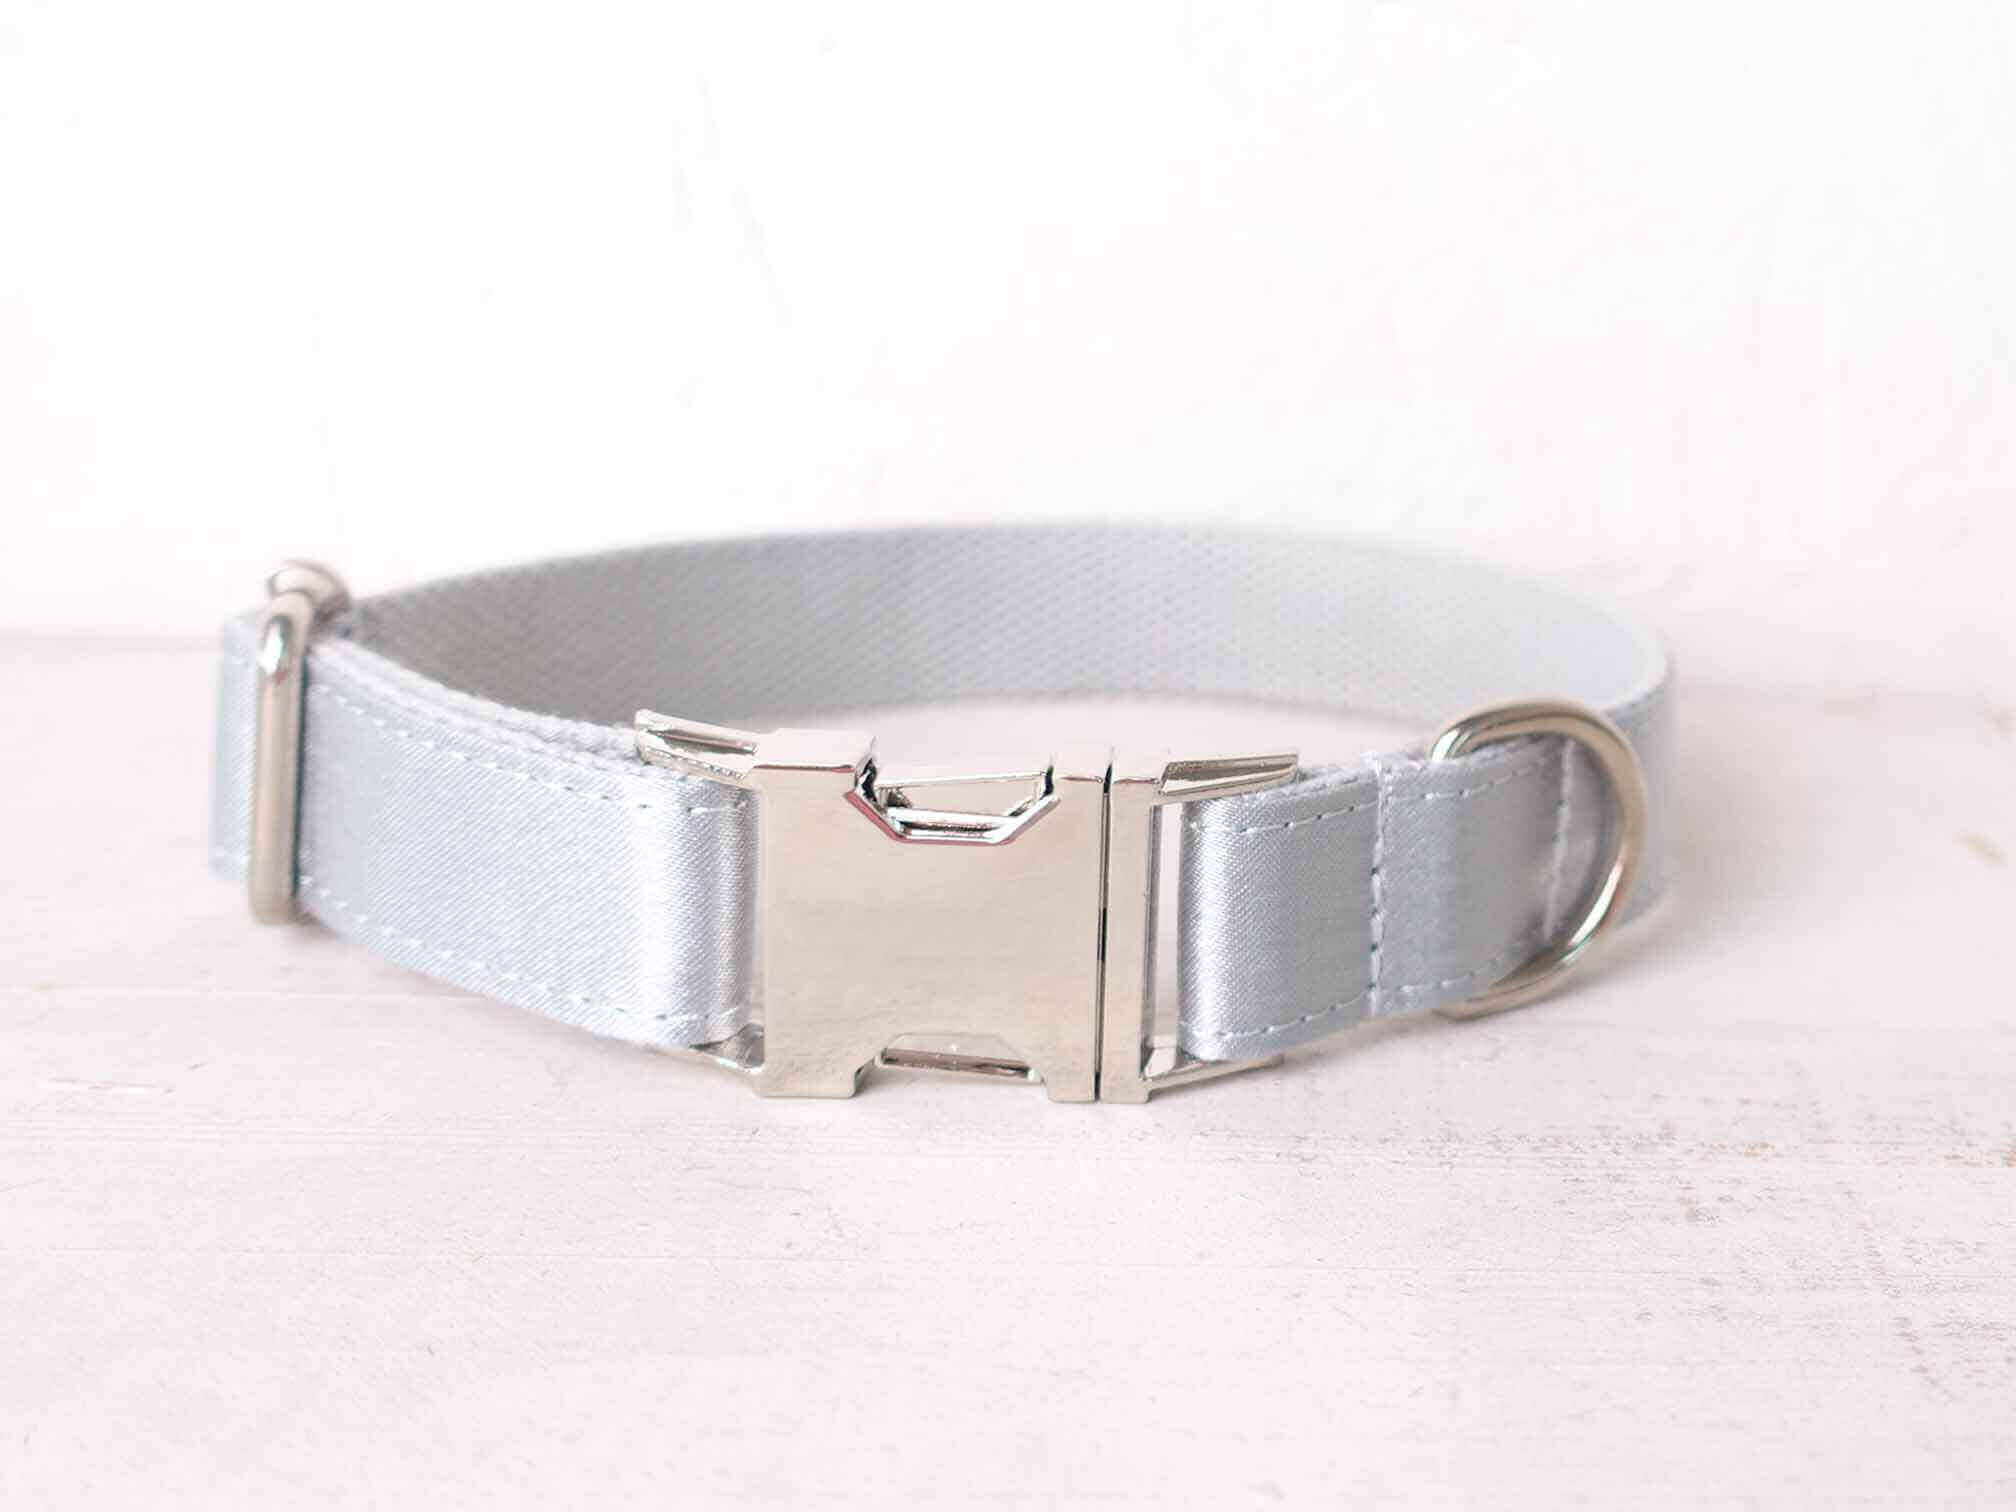 Dog Silvery Collar - Frenchiely